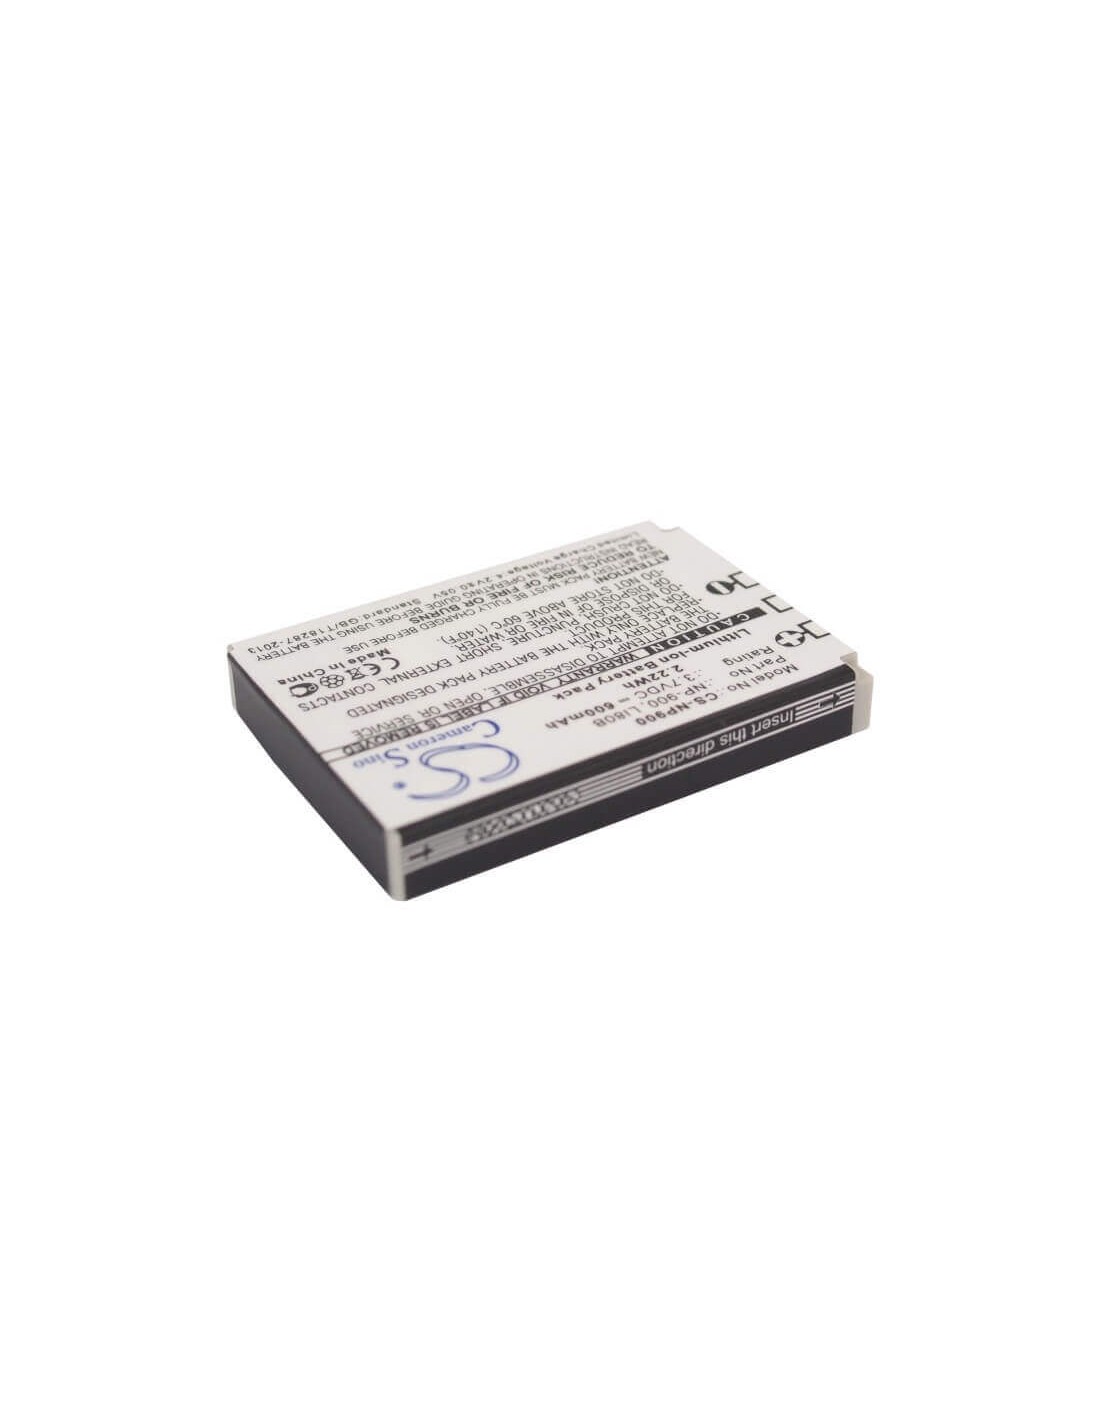 Battery for Rollei Compactline Cl-103, Compactline Cl-110, 3.7V, 600mAh - 2.22Wh